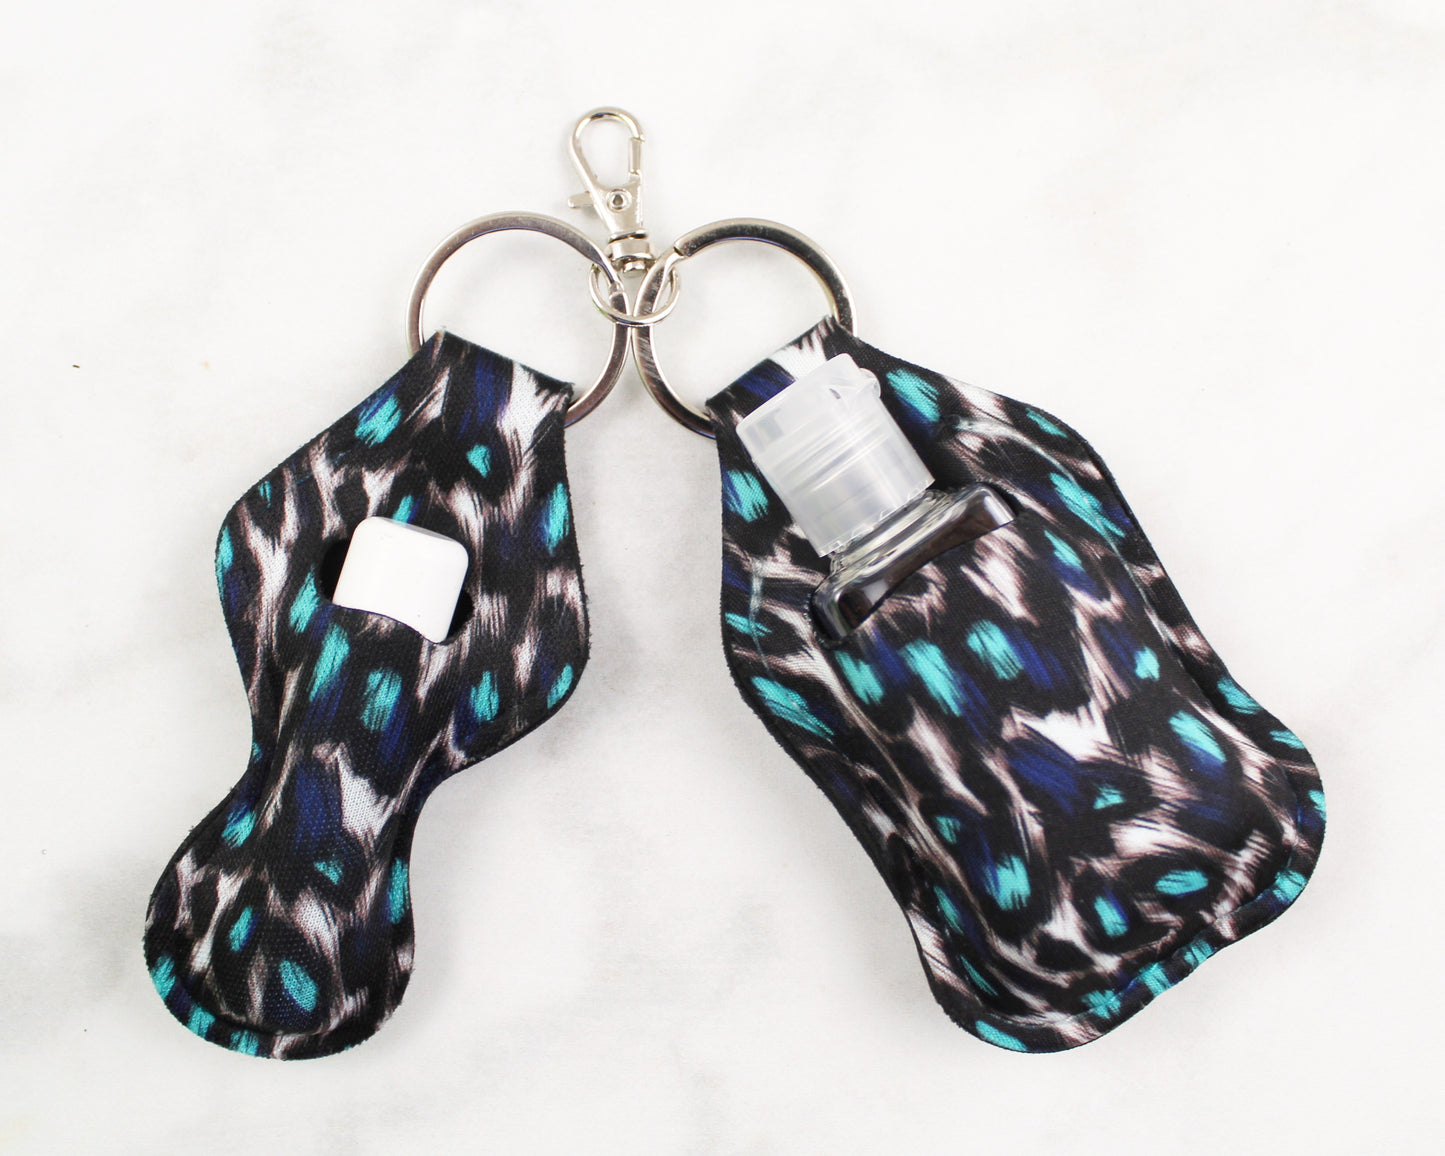 Cheetah with Teal, Navy, Black, and White Hand Sanitizer and Lip Balm Holders